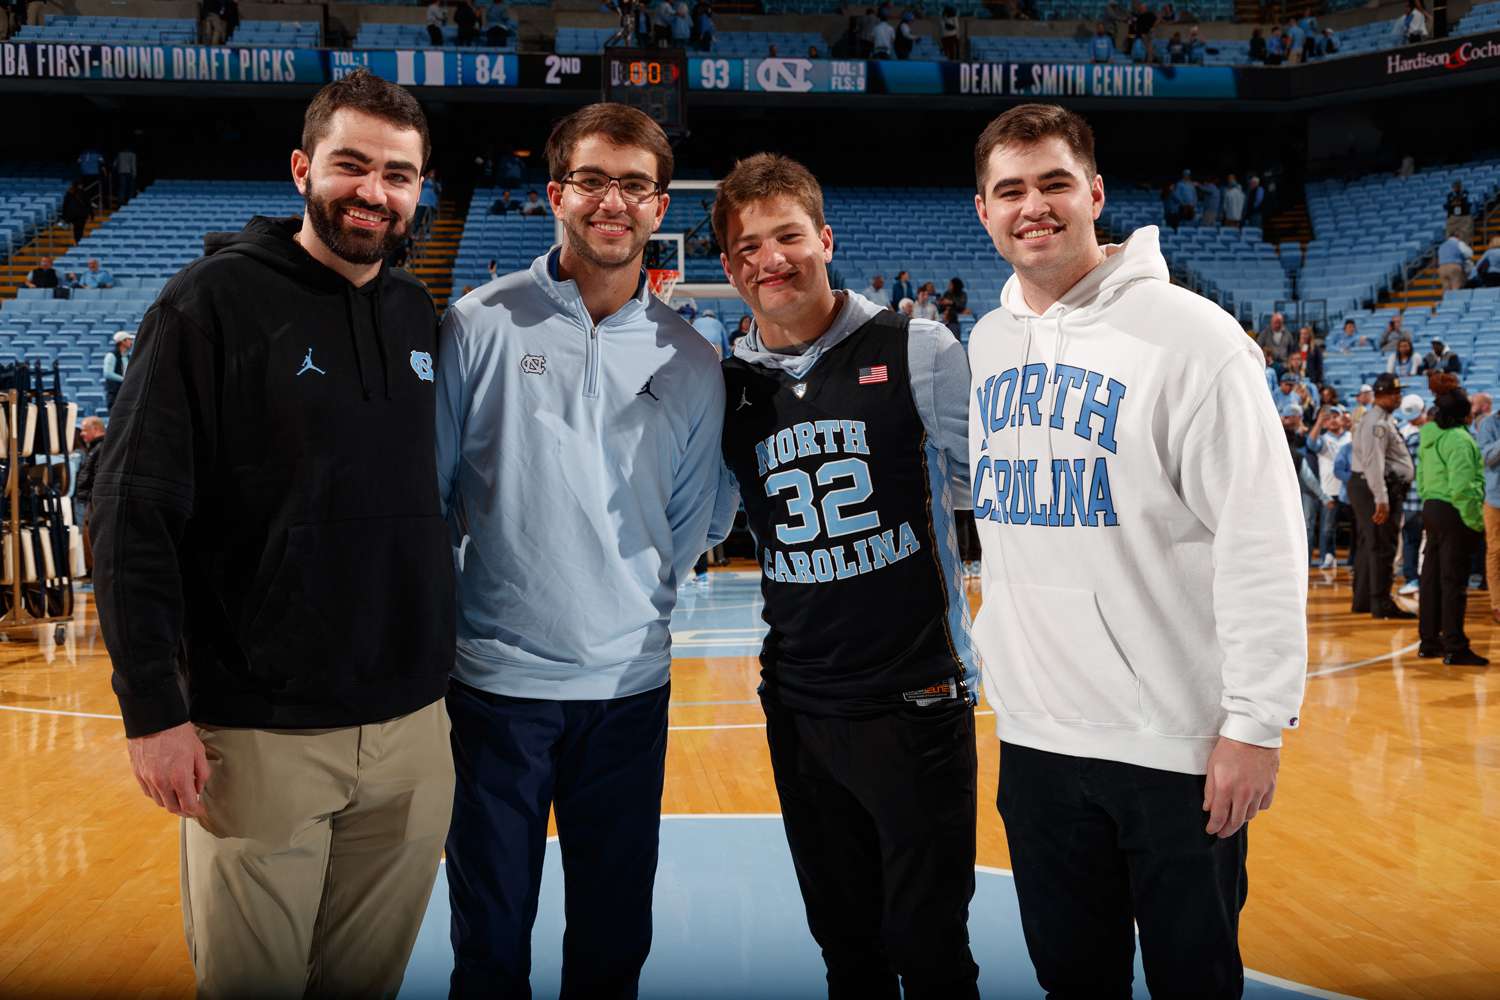 North Carolina Tar Heels current and former student athlete Maye brothers (L to R) Luke Maye, Beau Maye, Drake Maye, and Cole Maye during a basketball game against the Duke Blue Devils at the Dean Smith Center on February 03, 2024 in Chapel Hill, North Carolina. North Carolina won 93-84